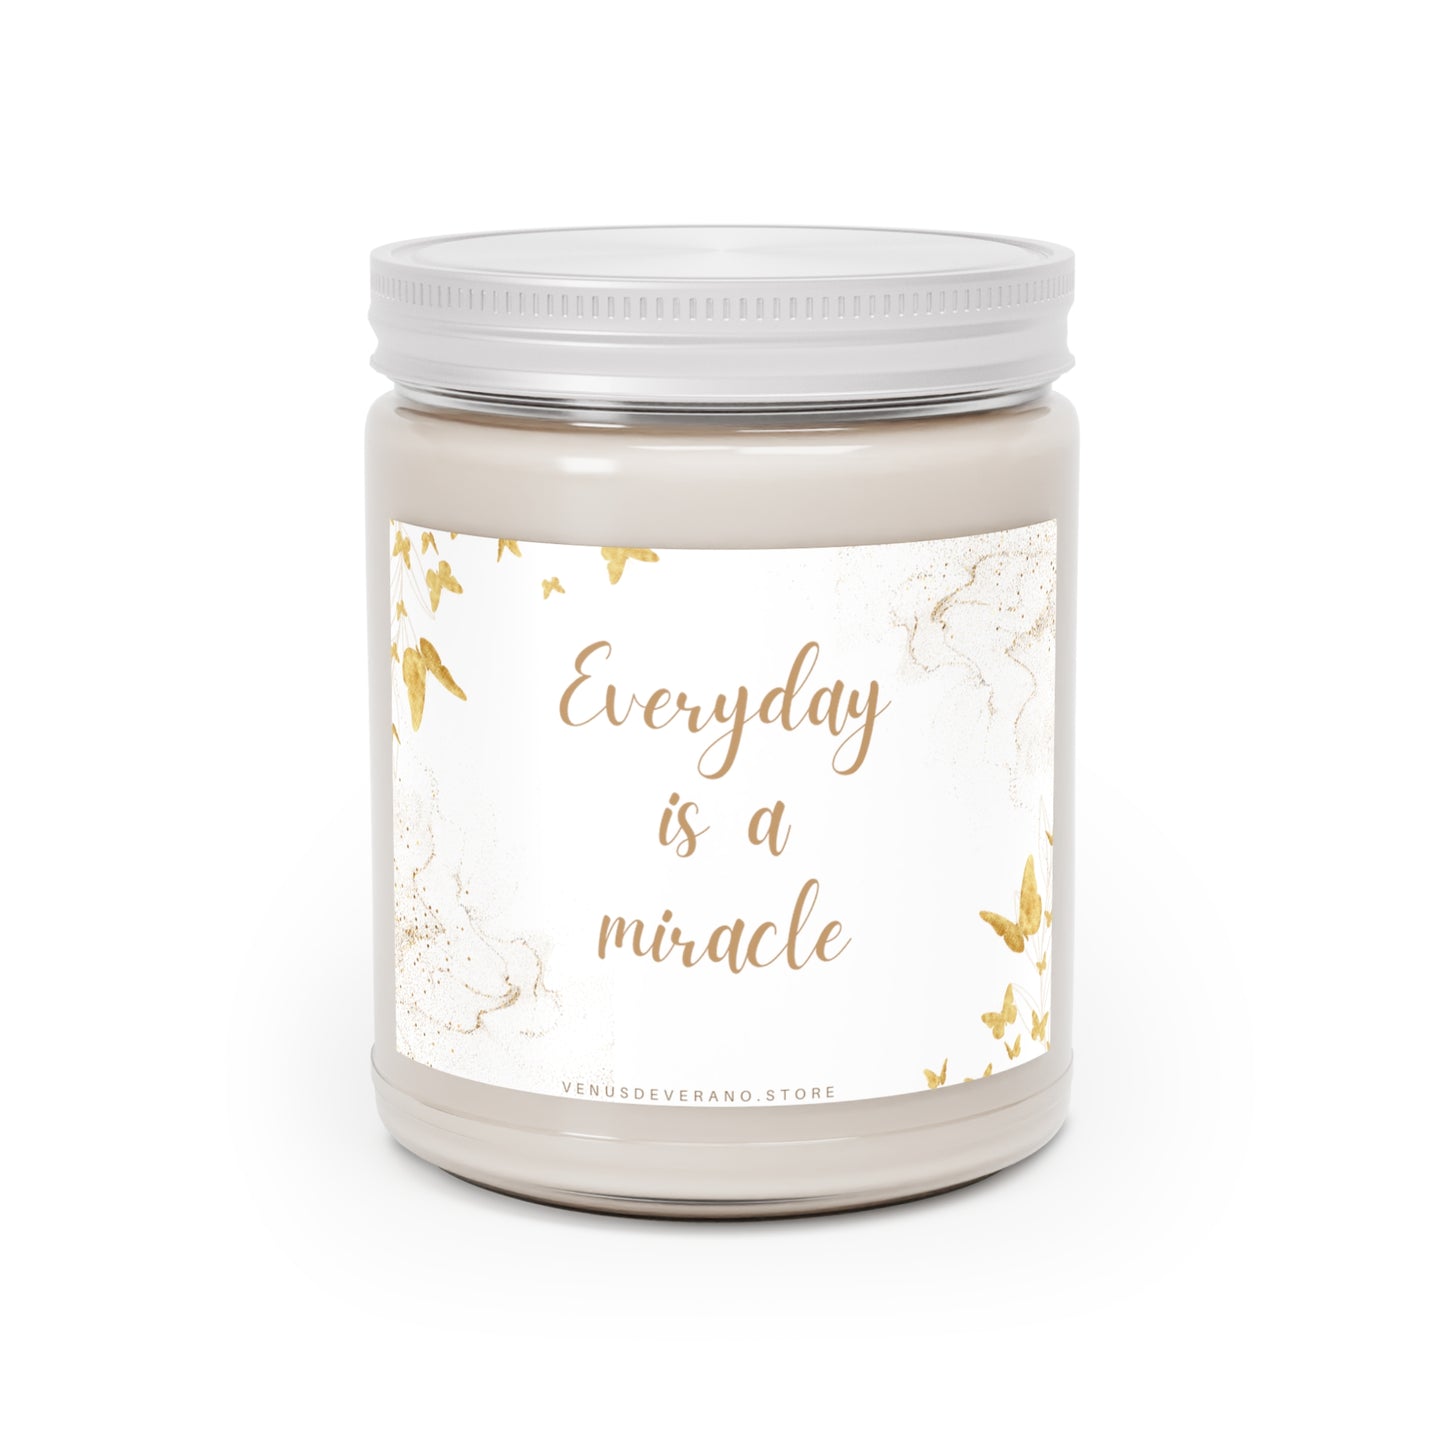 Scented Candles, 9oz - Everyday is a MIRACLE - Made 100% natural soy wax blend and cotton wick - Vanilla Bean, Comfort Spice and Sea Breeze fragrances available.